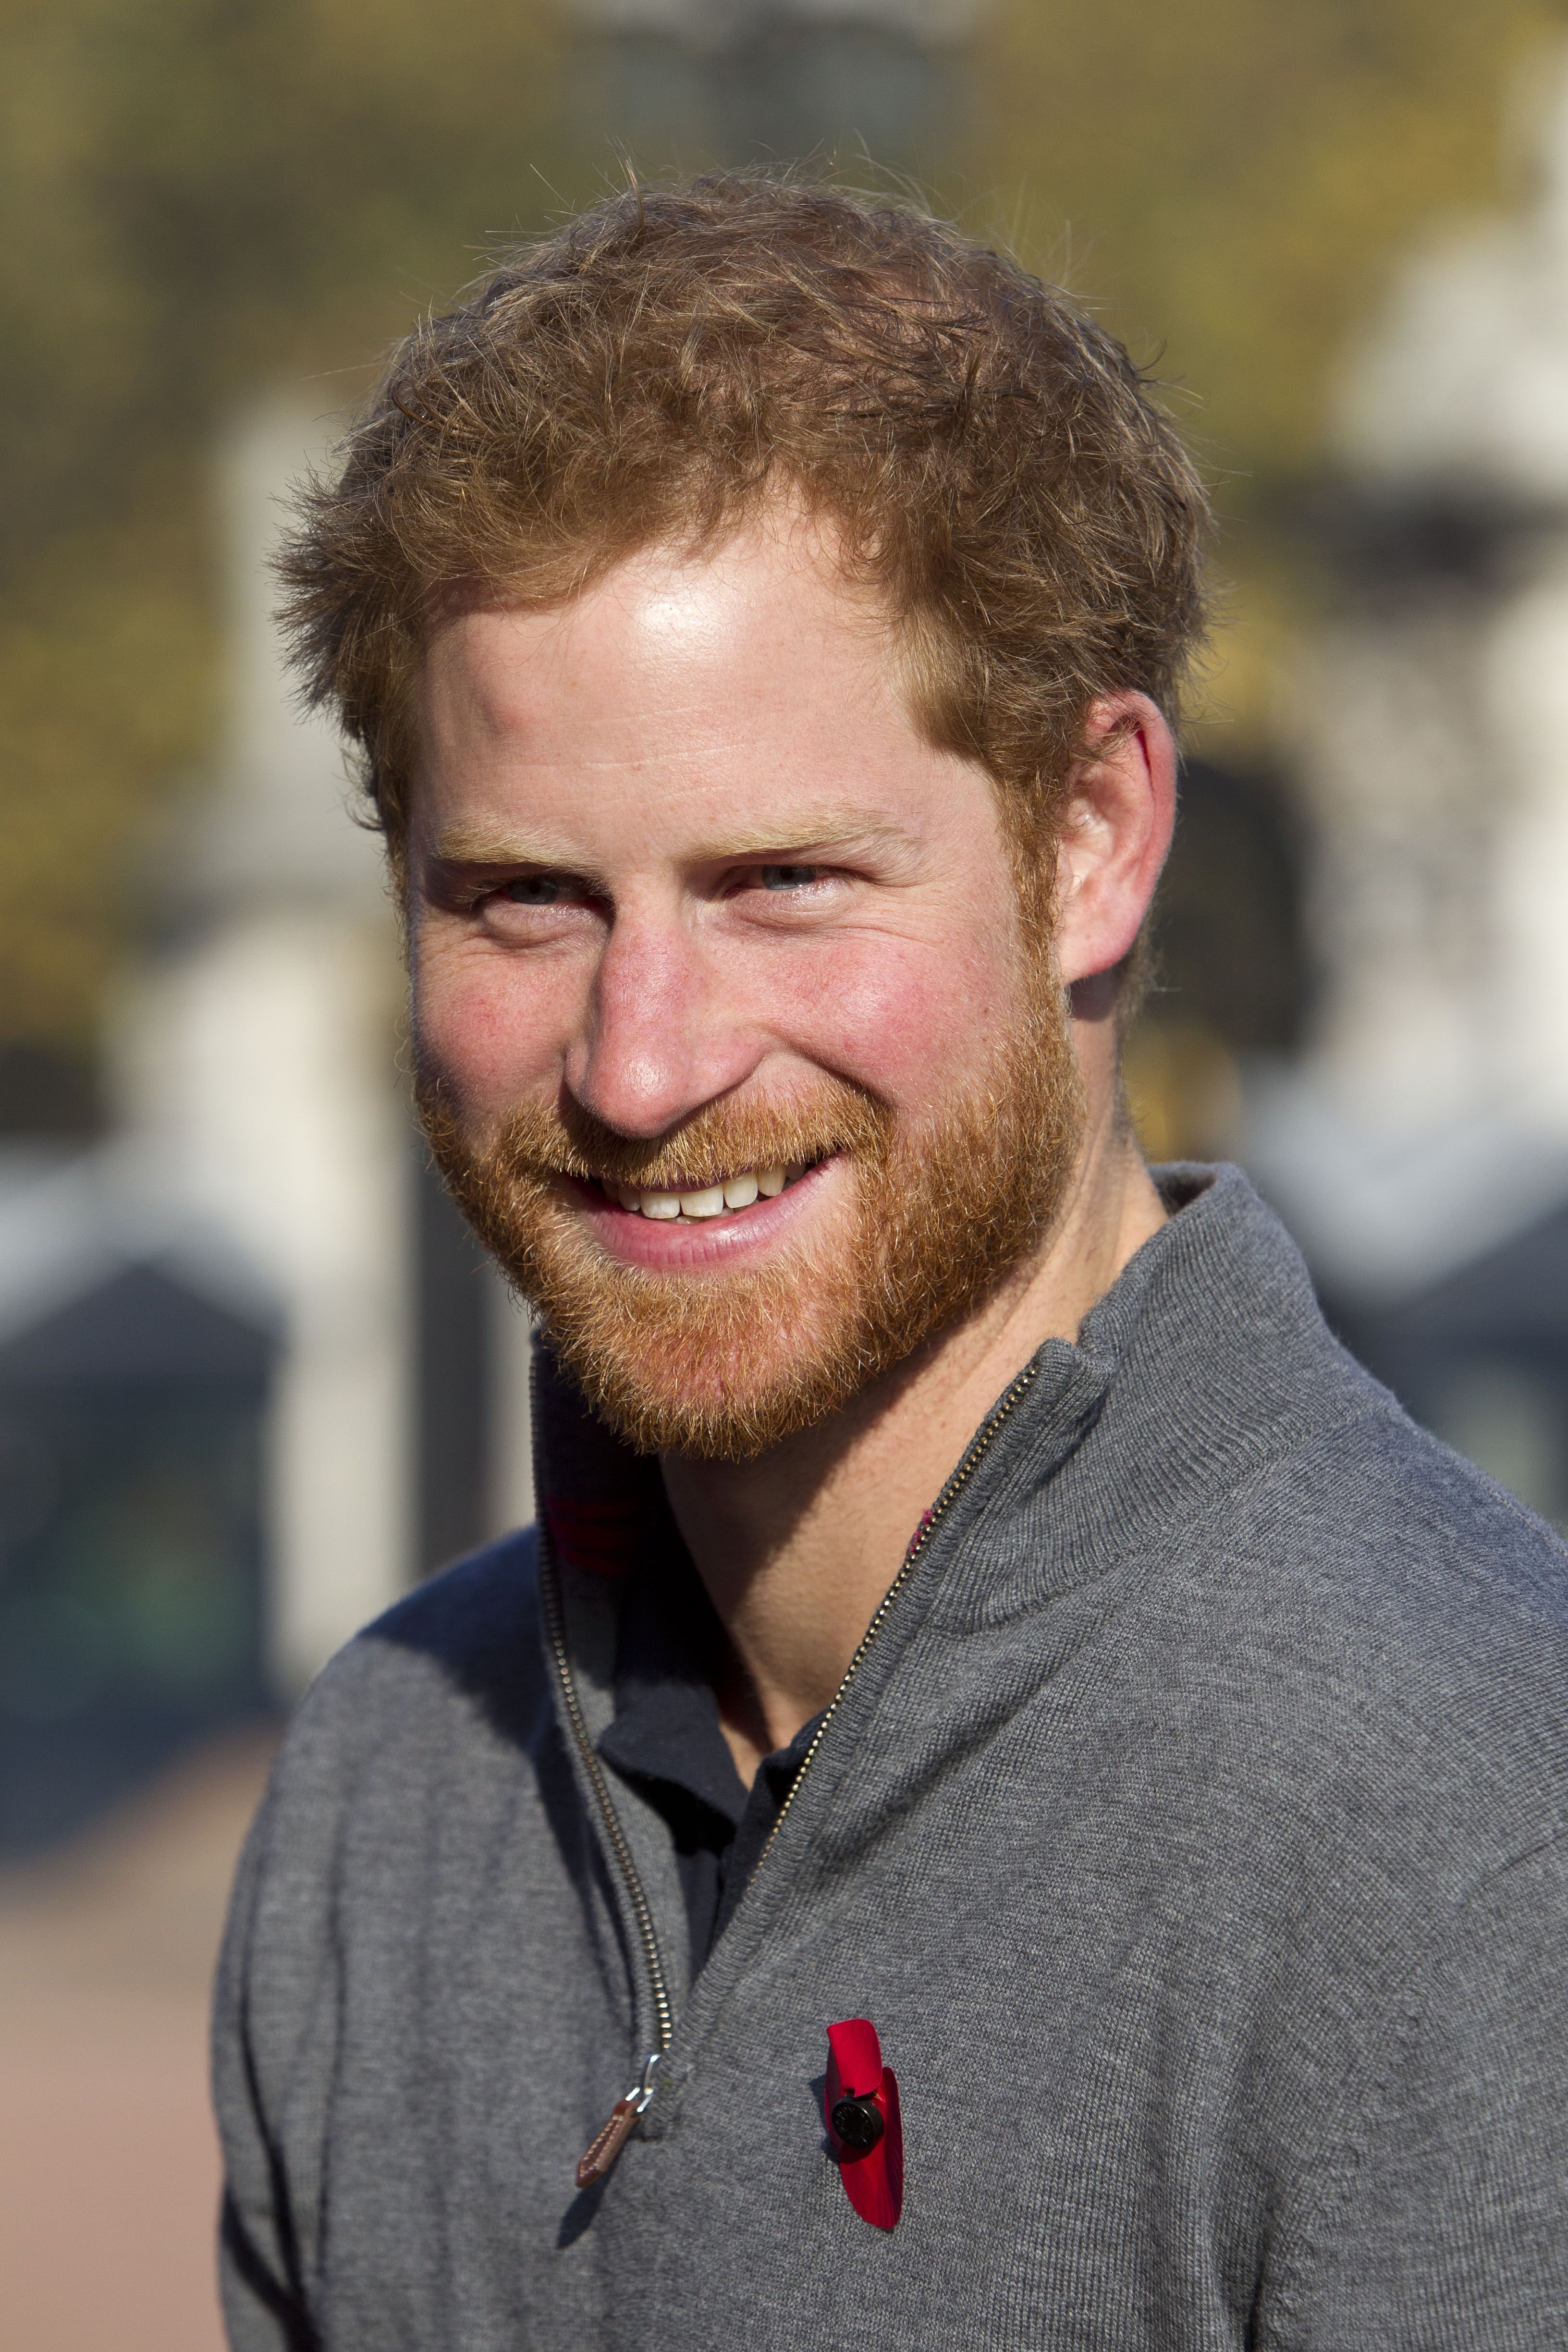 Prince Harry meets with members of the Walking With The Wounded team. | Source: Getty Images